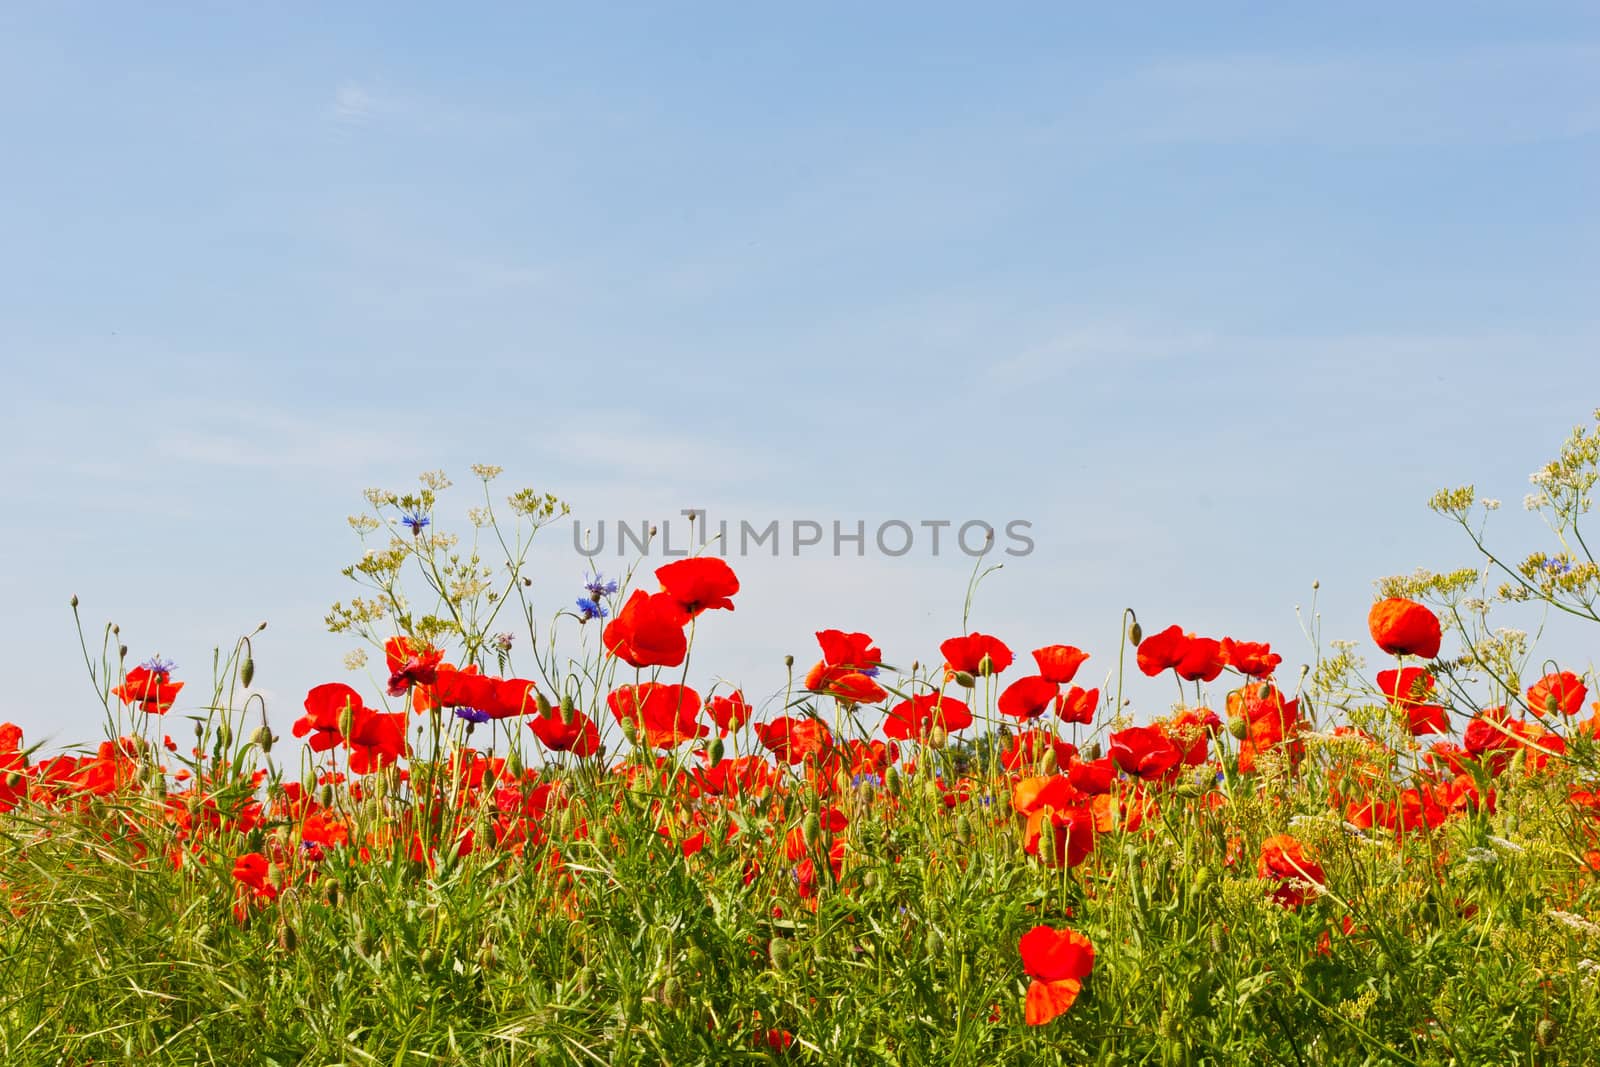 A poppy is any of a number of colorful flowers, typically with one per stem, belonging to the poppy family.